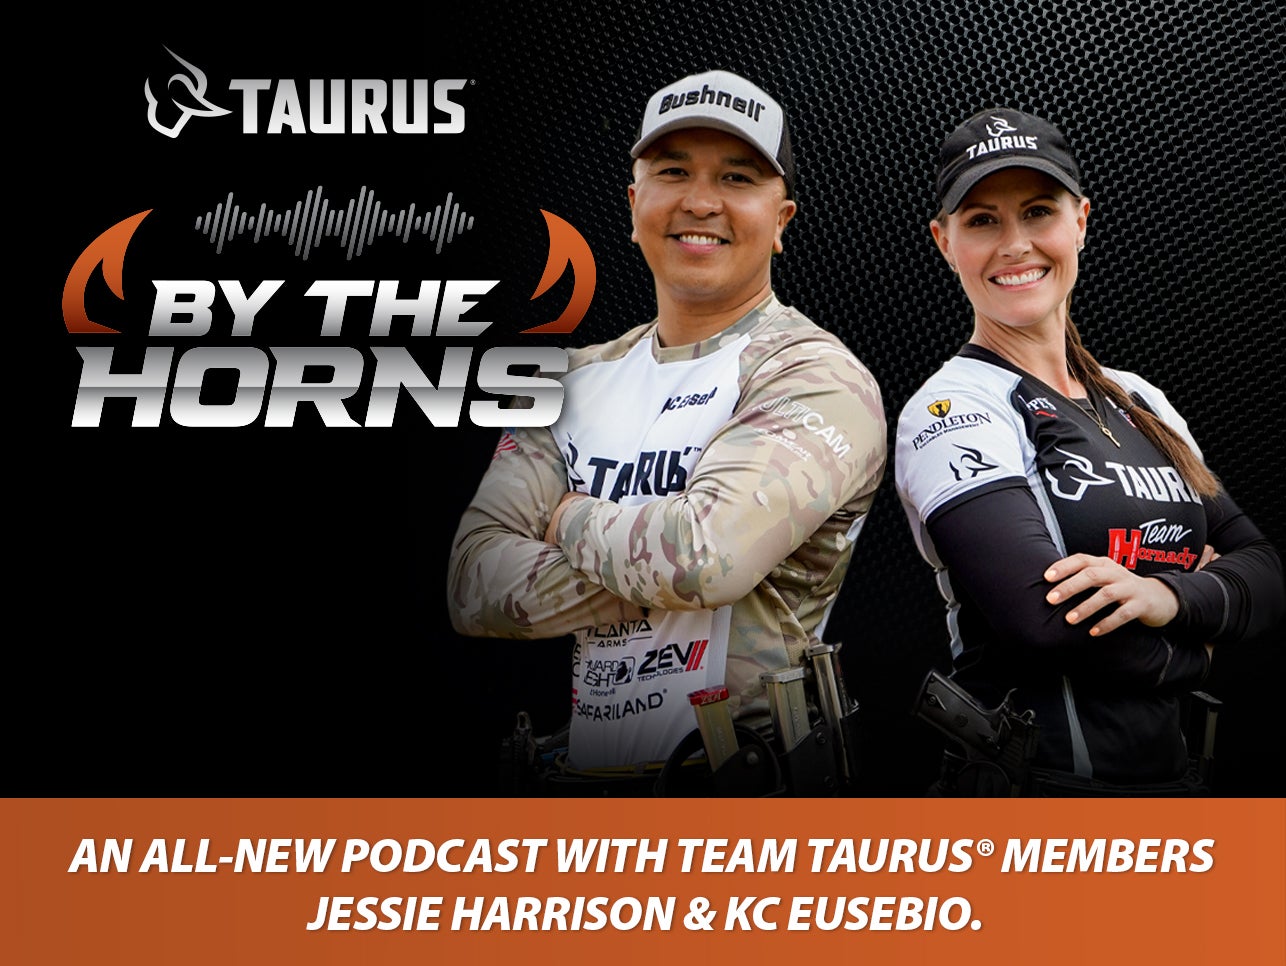 Taurus By the Horns - A new Podcast From Taurus USA